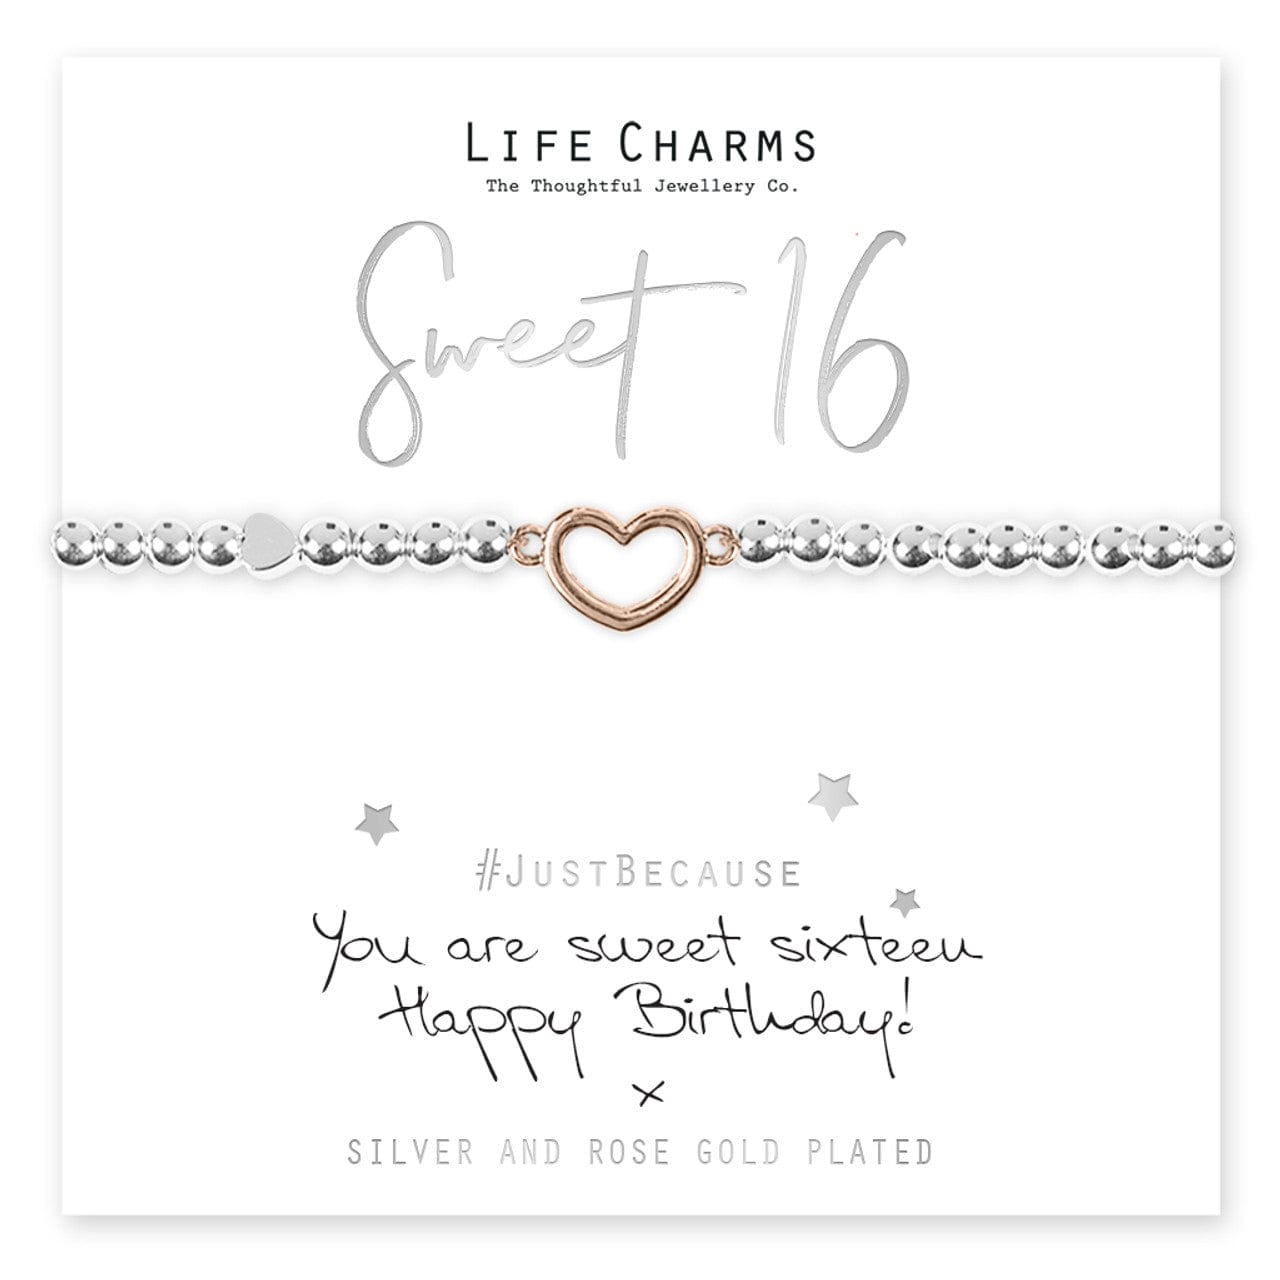 Life Charms Novelty Gifts Sweet 16 Birthday Bracelet